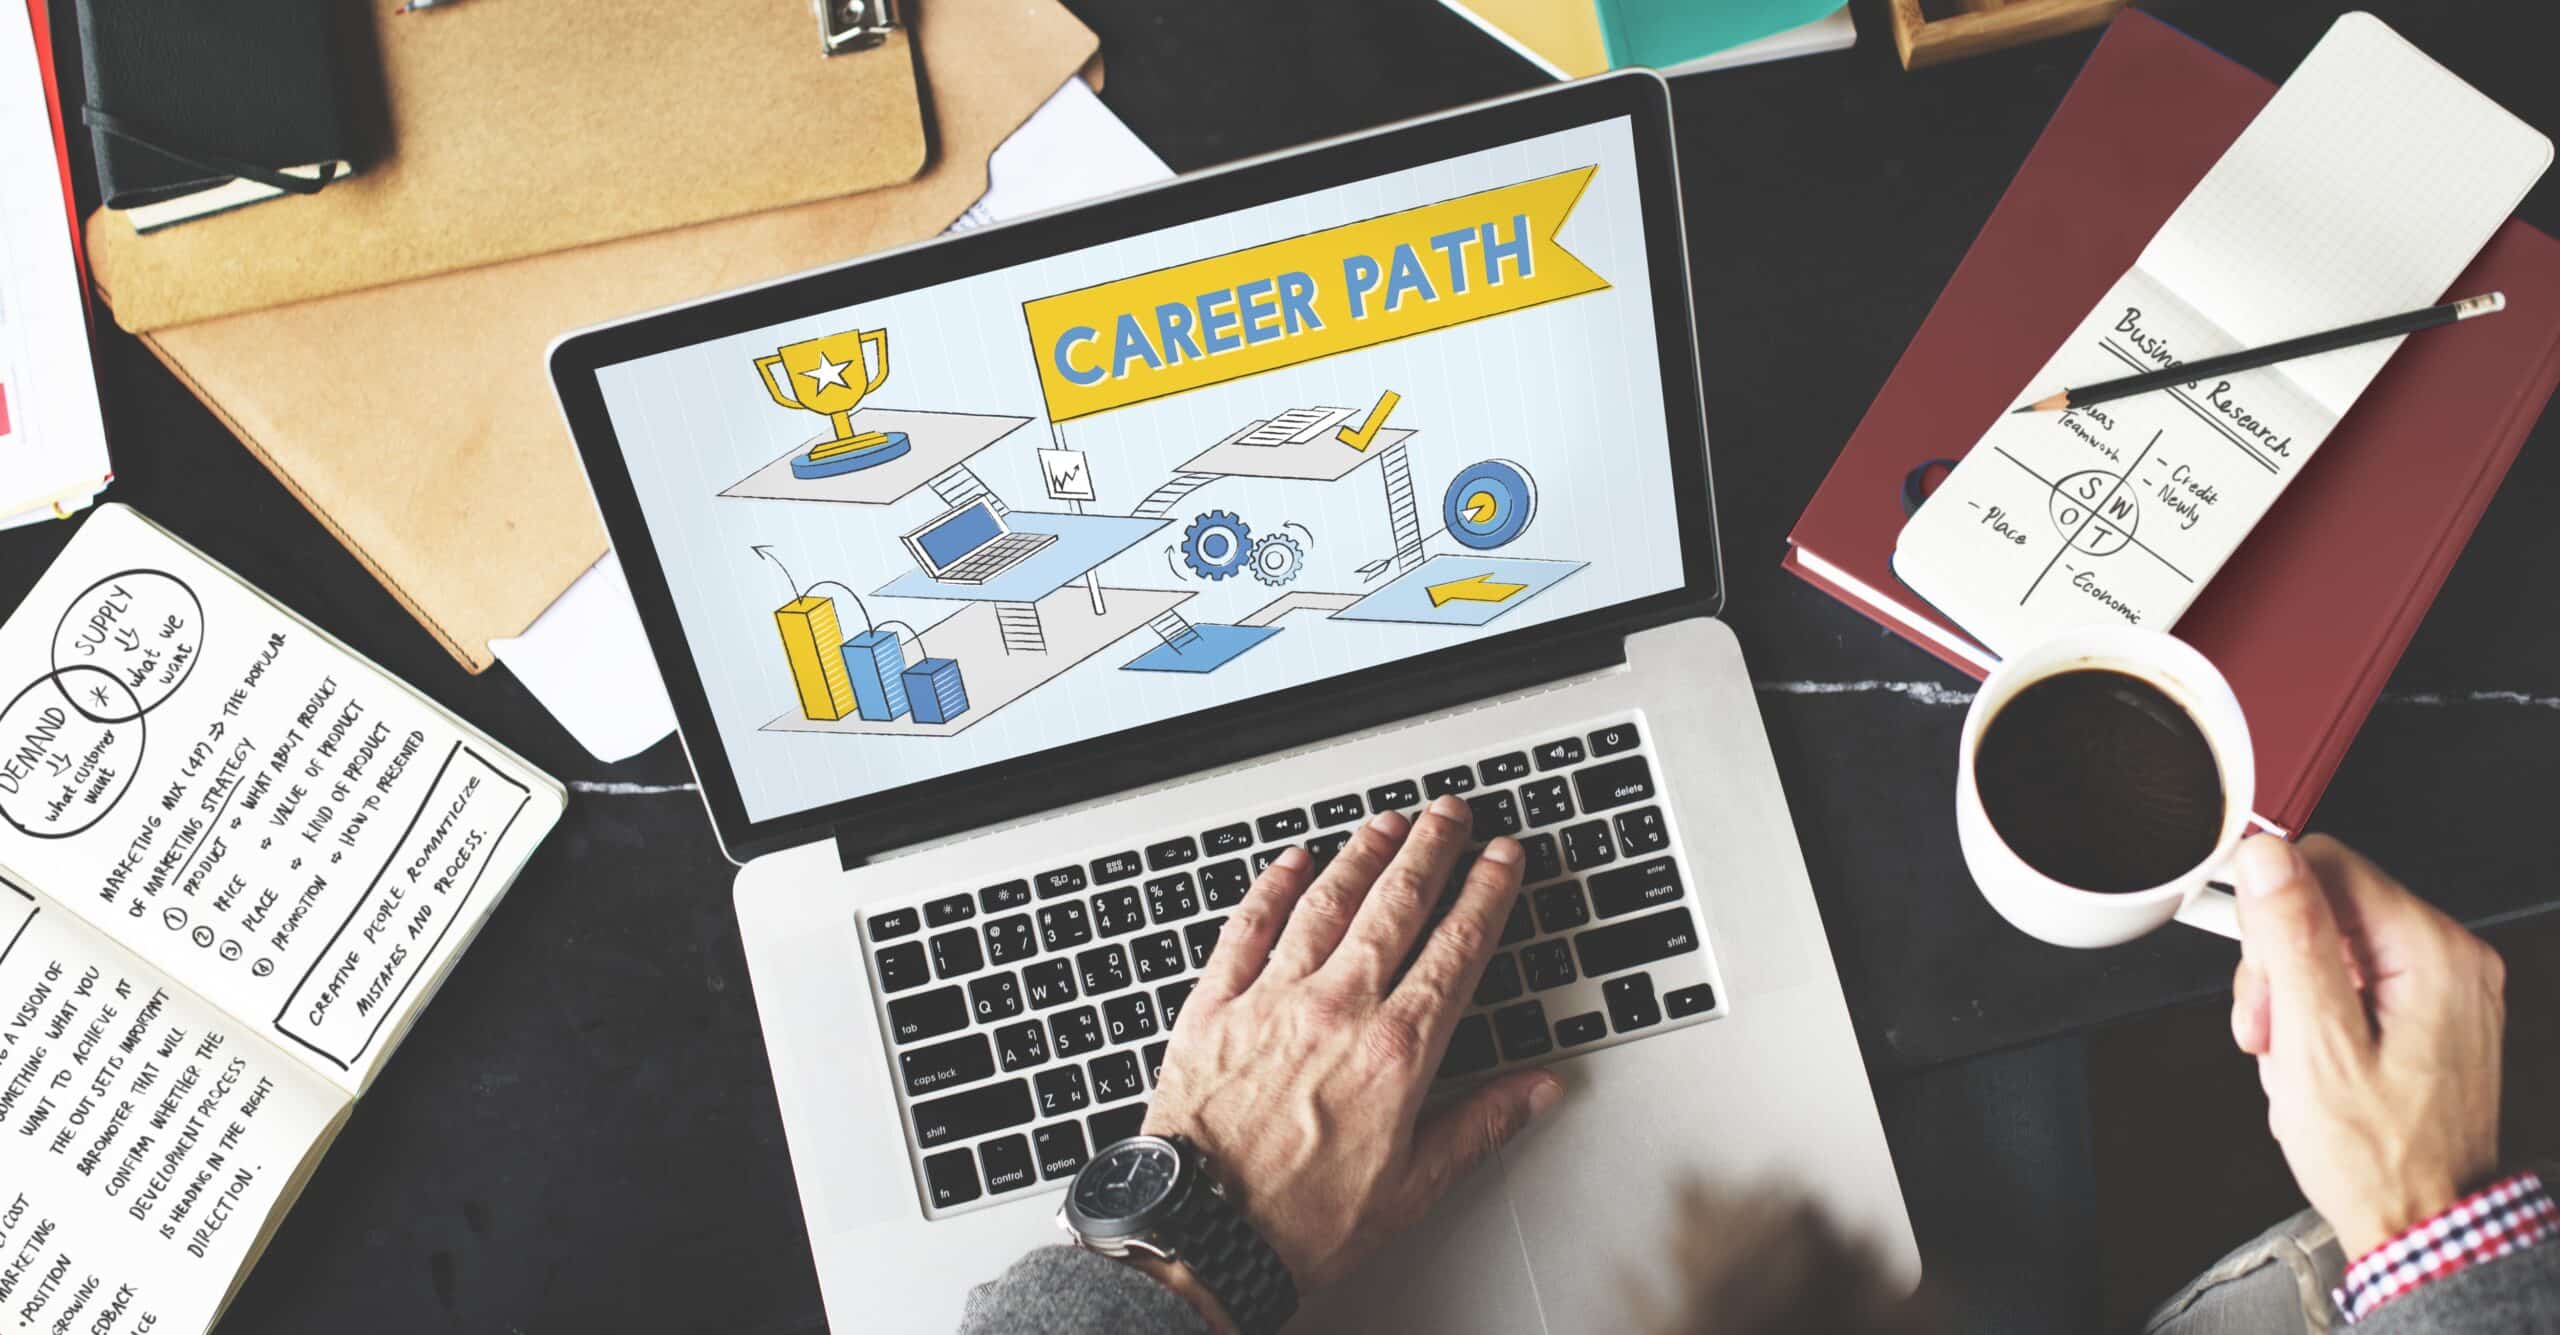 Career Path Employment Human Resources Work Concept. Man at laptop with the words career path in a graphic on his screen